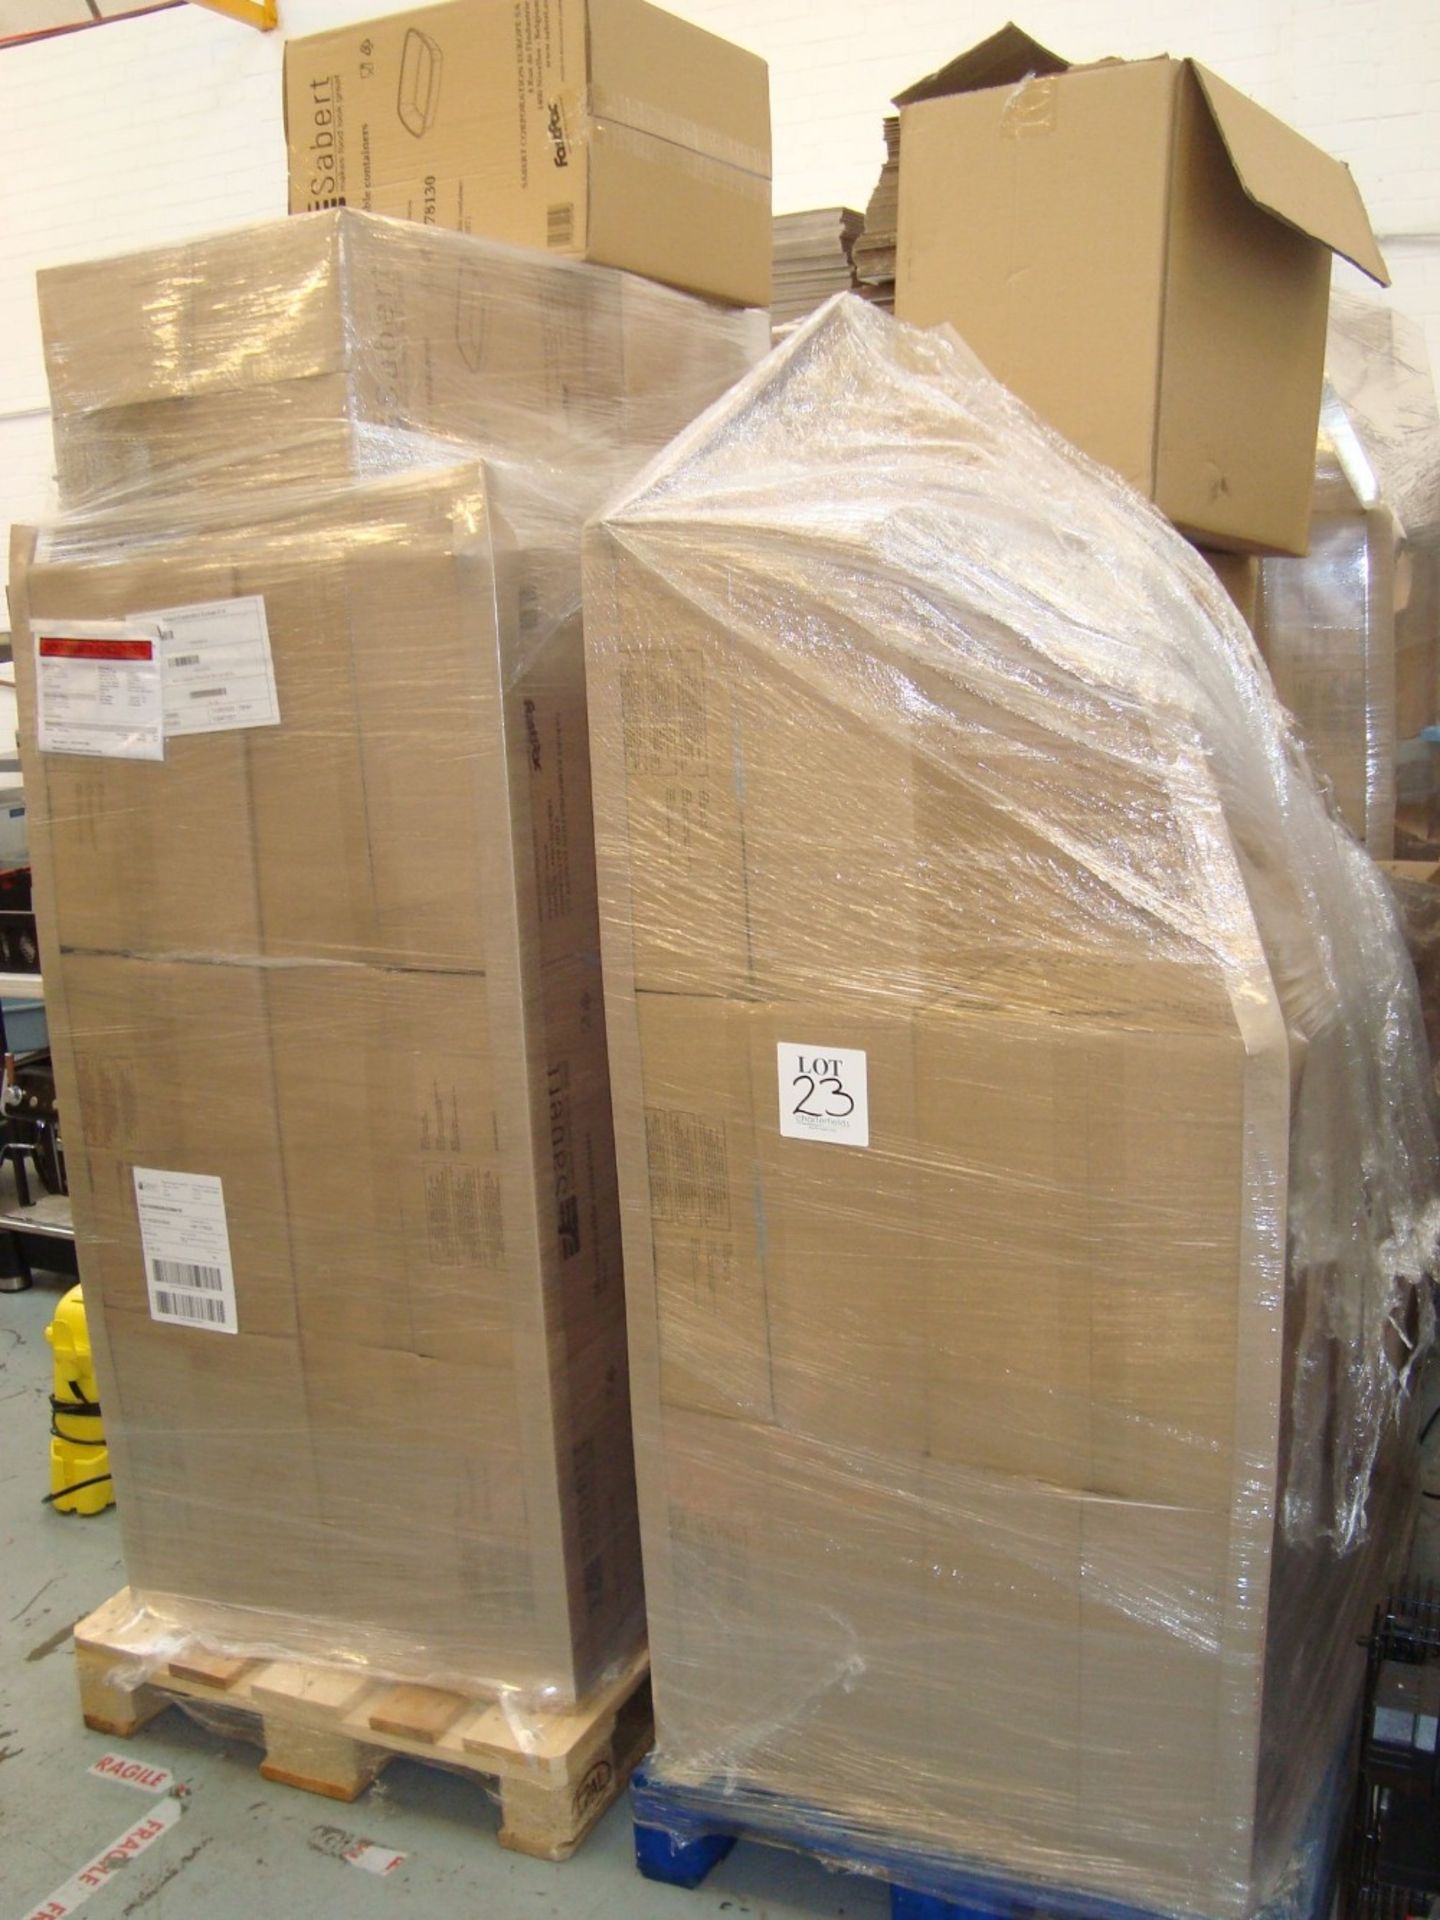 Four pallets of Sabert HOT78130 microwavable containers